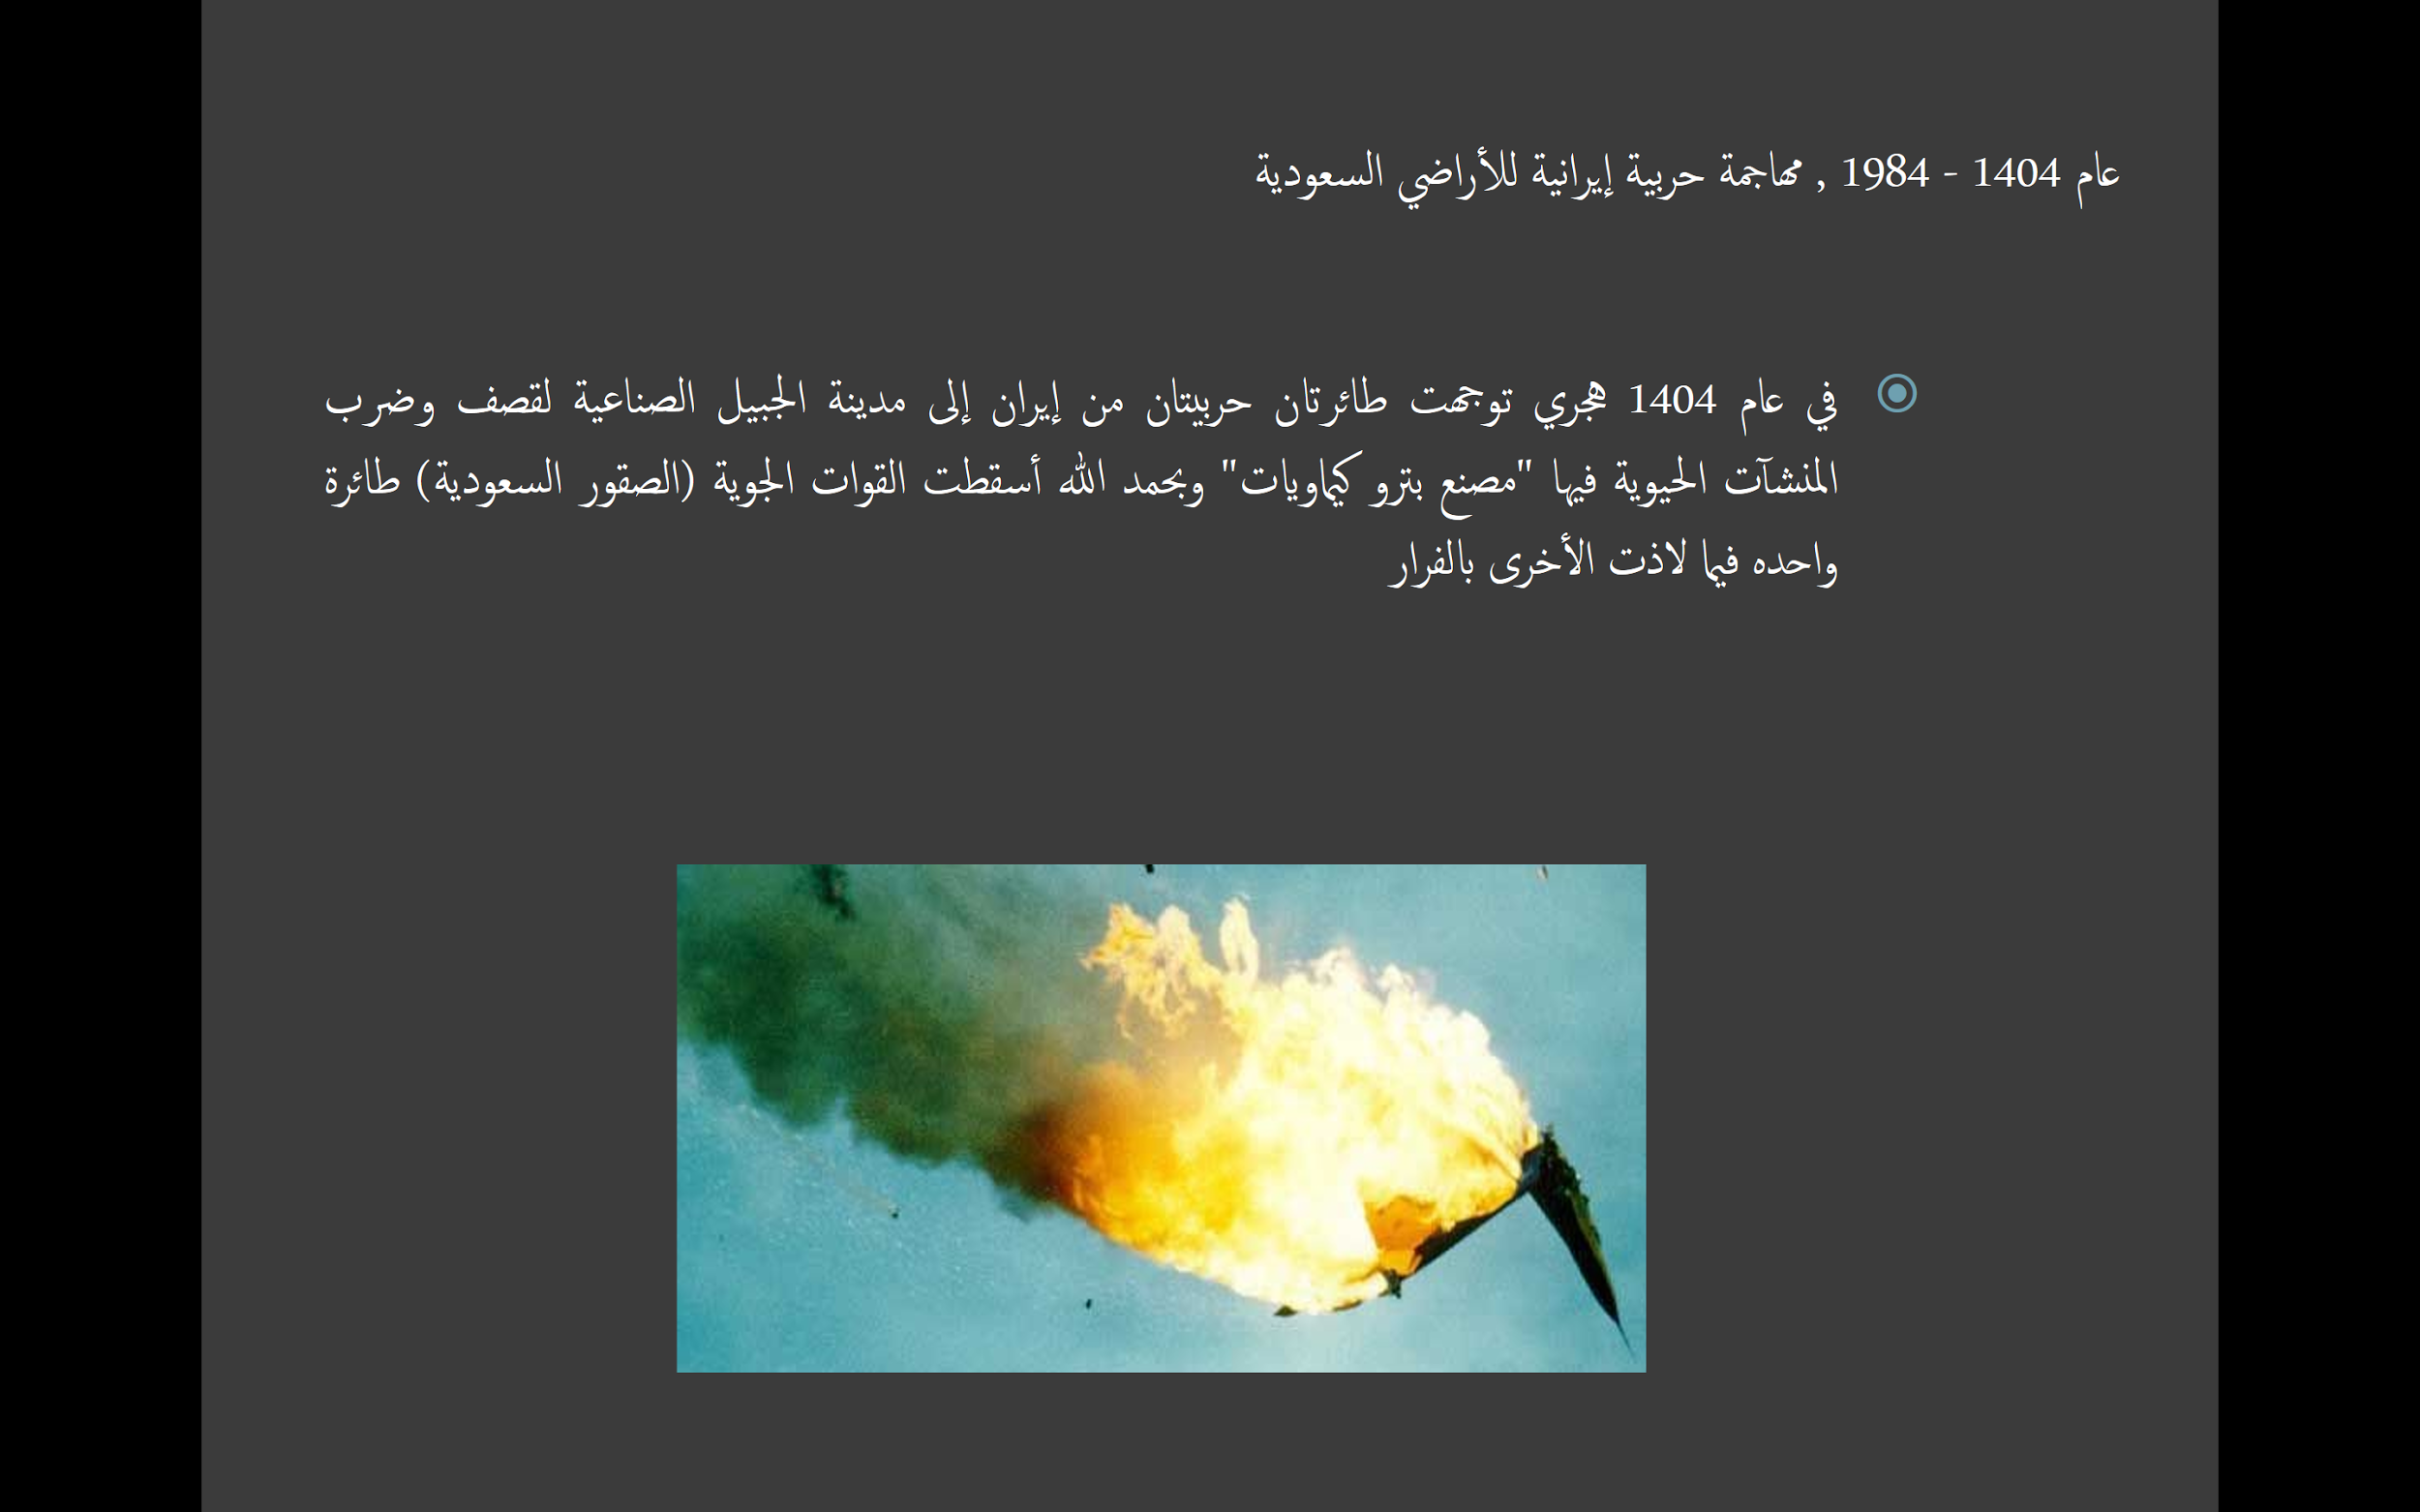 Figure 2: Screenshot from a slide referred to an Iranian attack in 1984 against petrochemical facilities in Saudi Arabia.